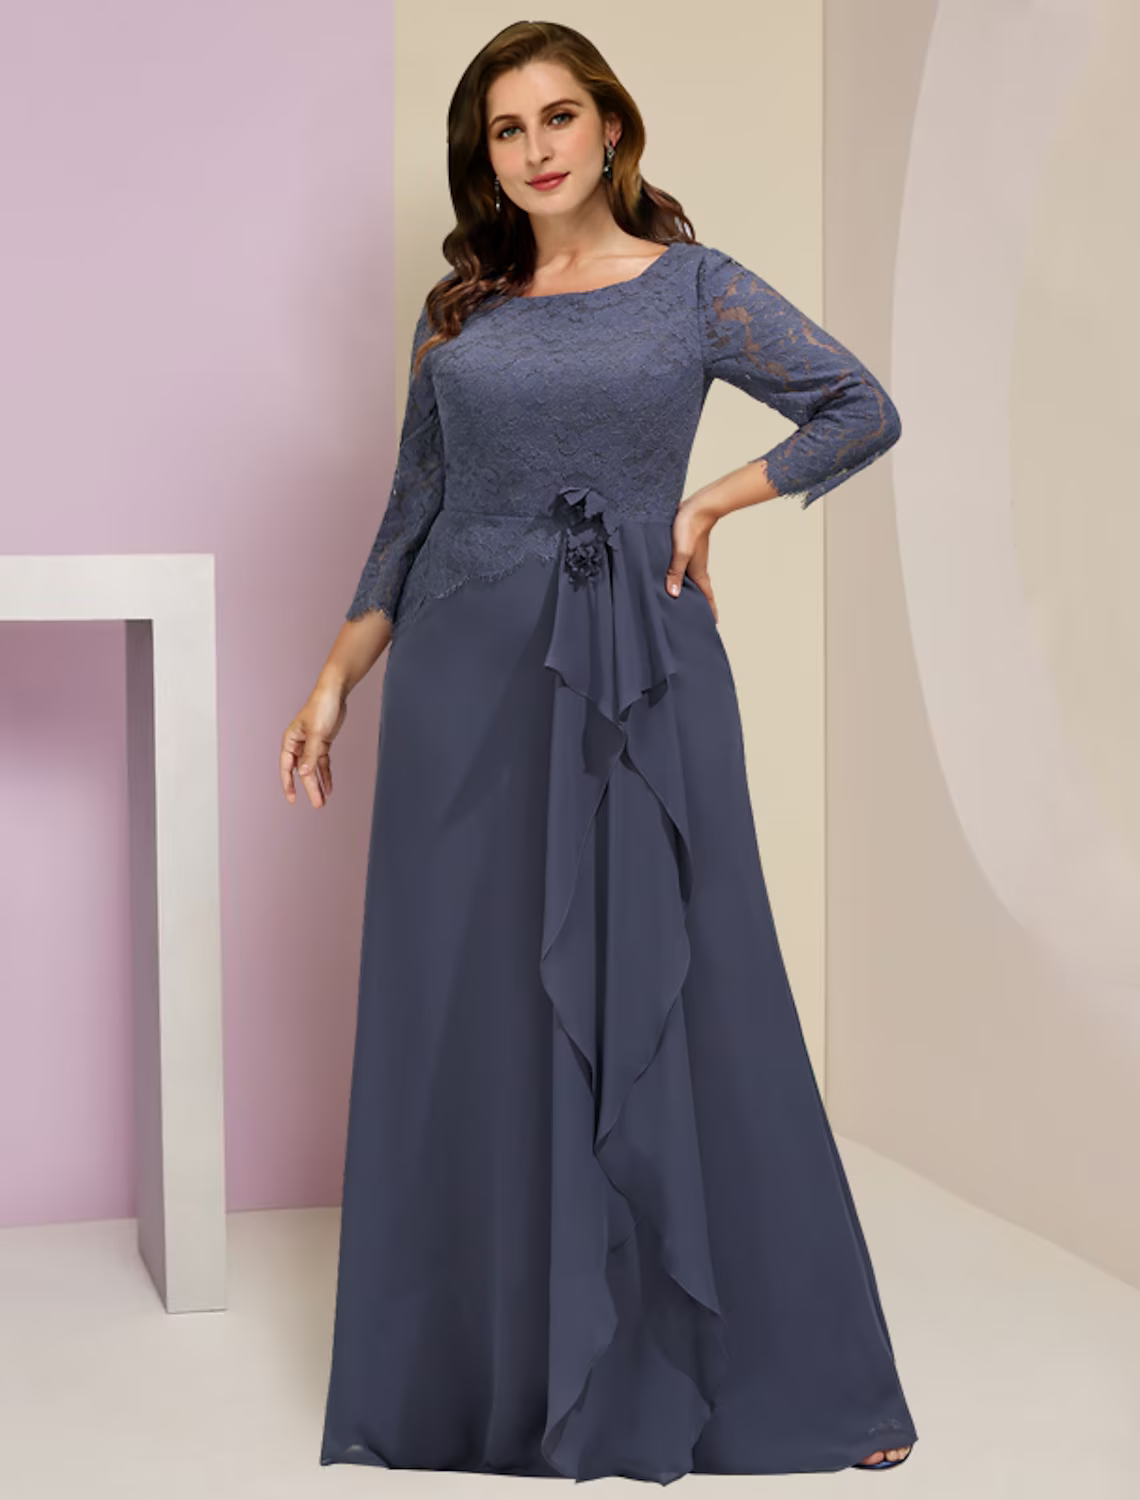 Plus Size Mother of the Bride Dress Wedding Guest Party Elegant Scoop Neck Floor Length Chiffon Lace  Sleeve with Ruffles Appliques